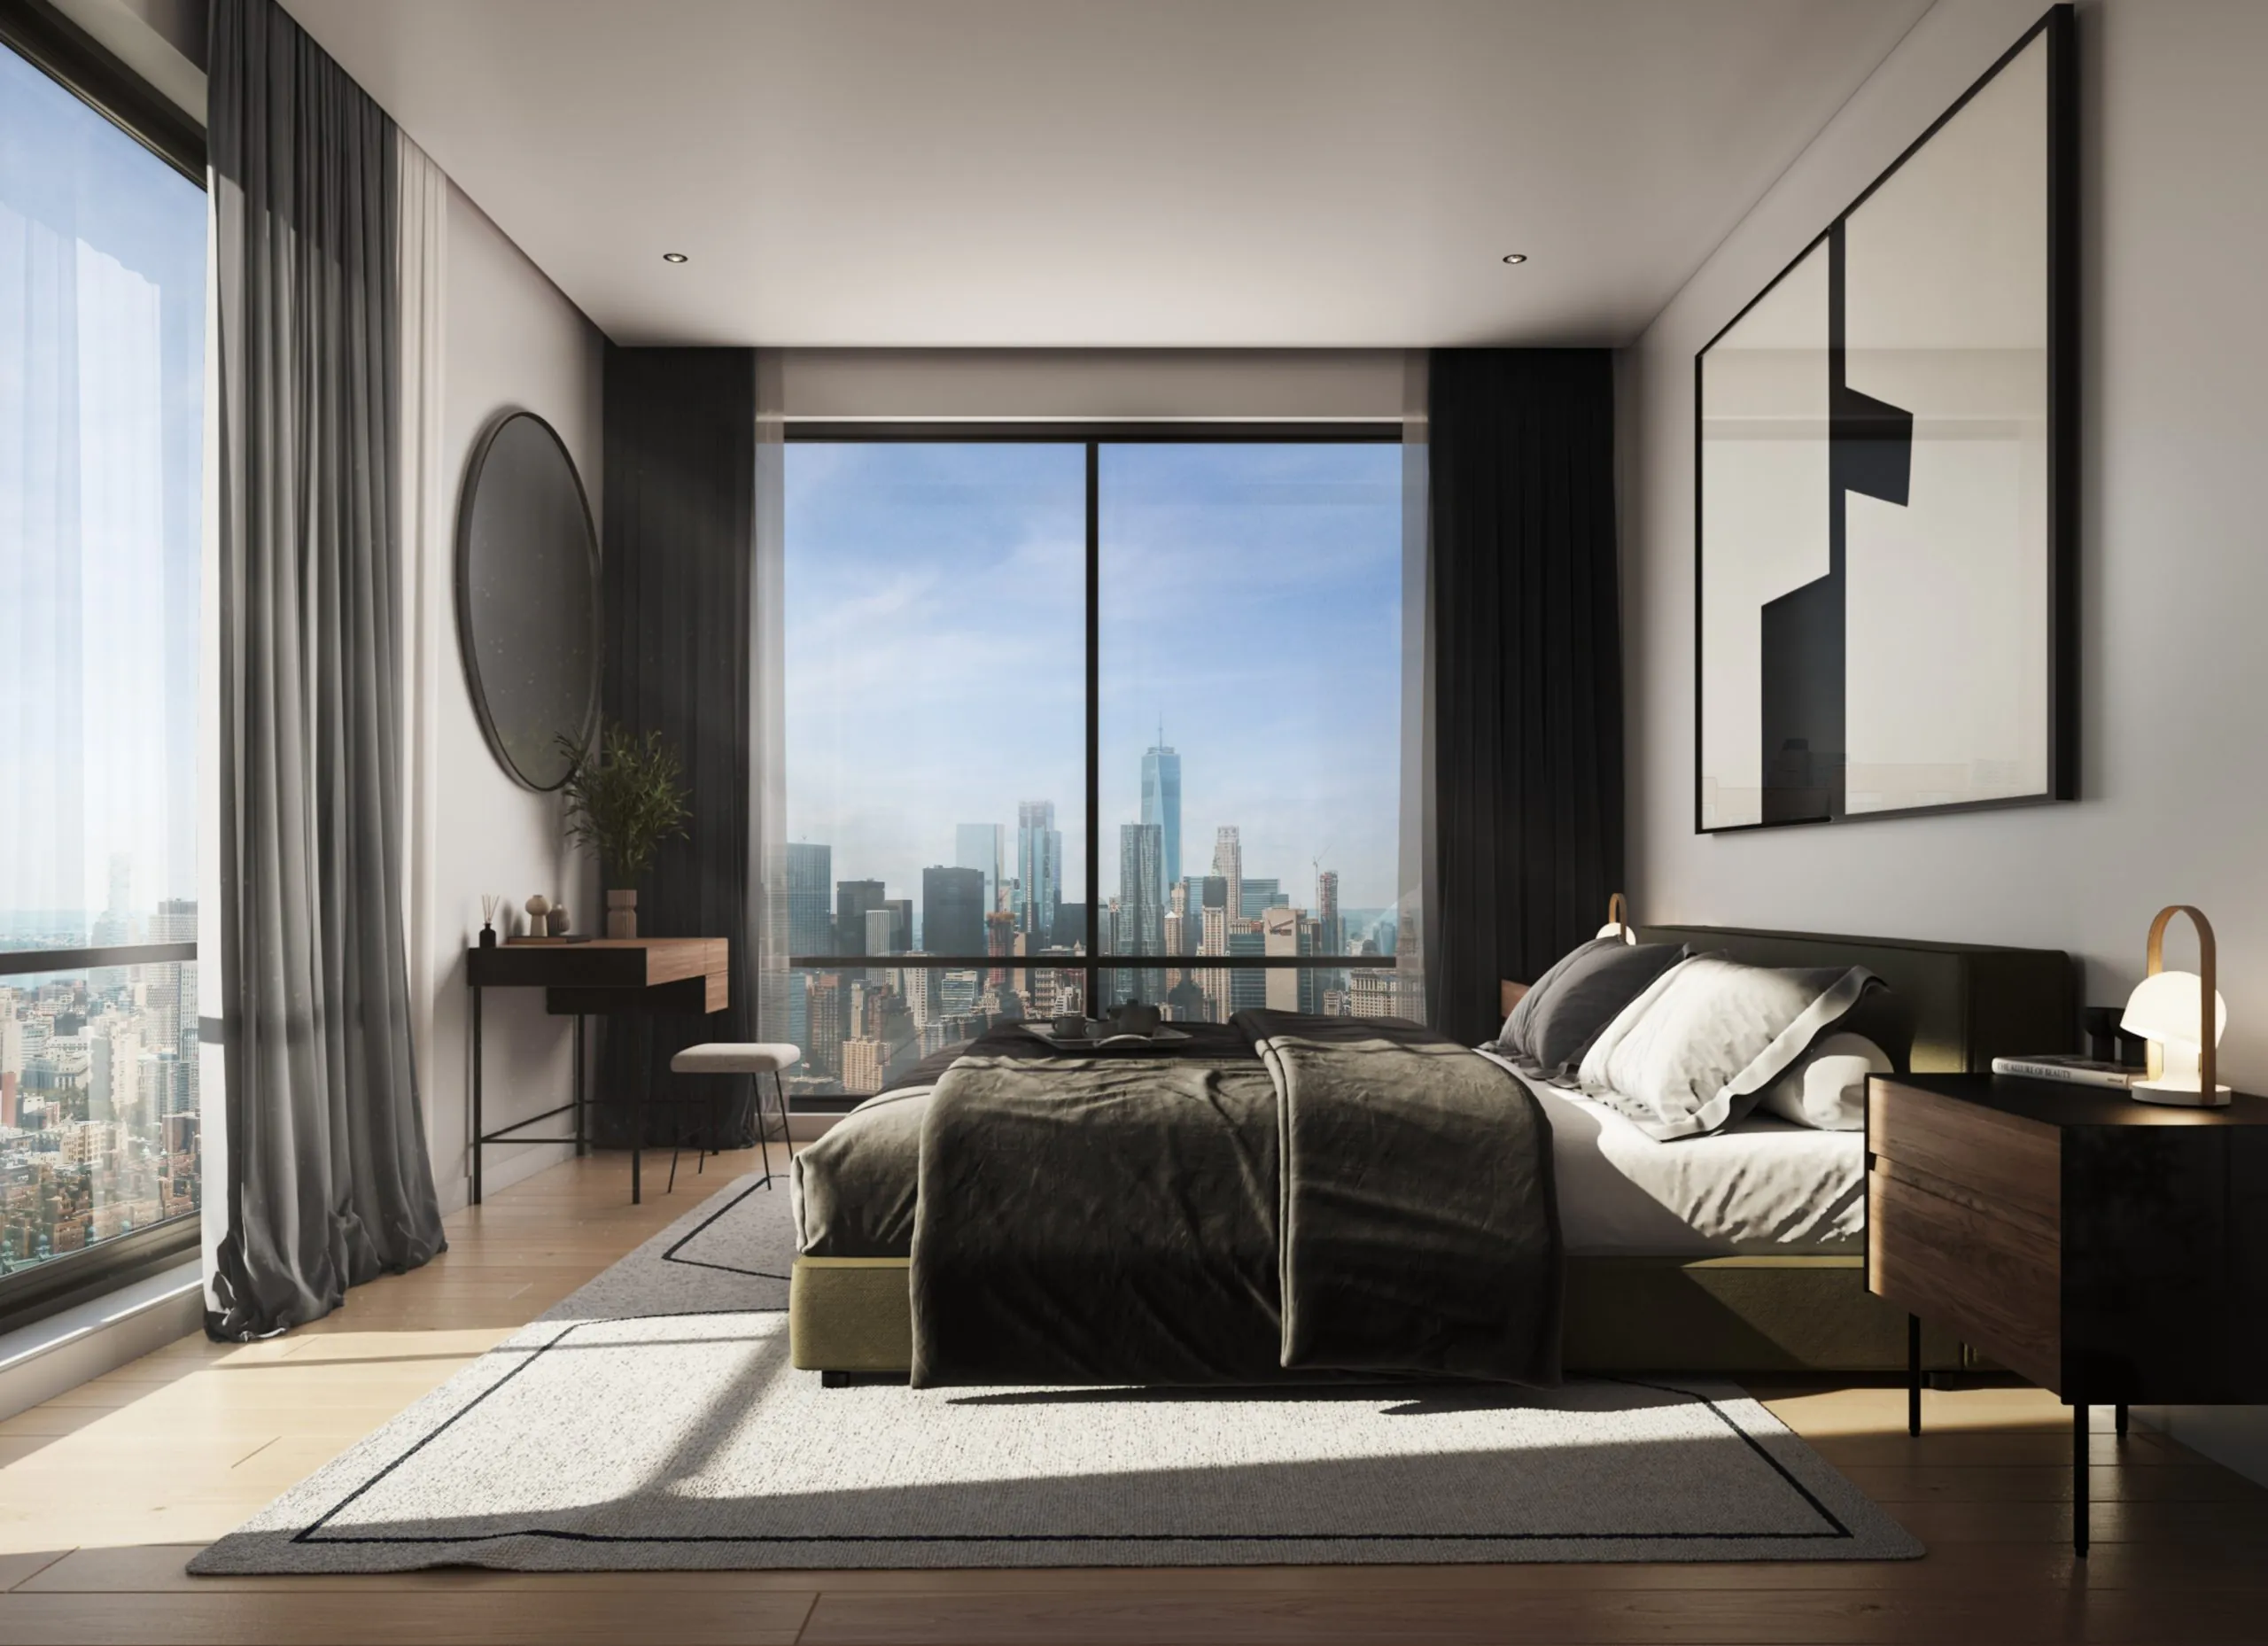 High ceilings, open city views, and generous proportions are what make the primary bedrooms at Amnia perfect